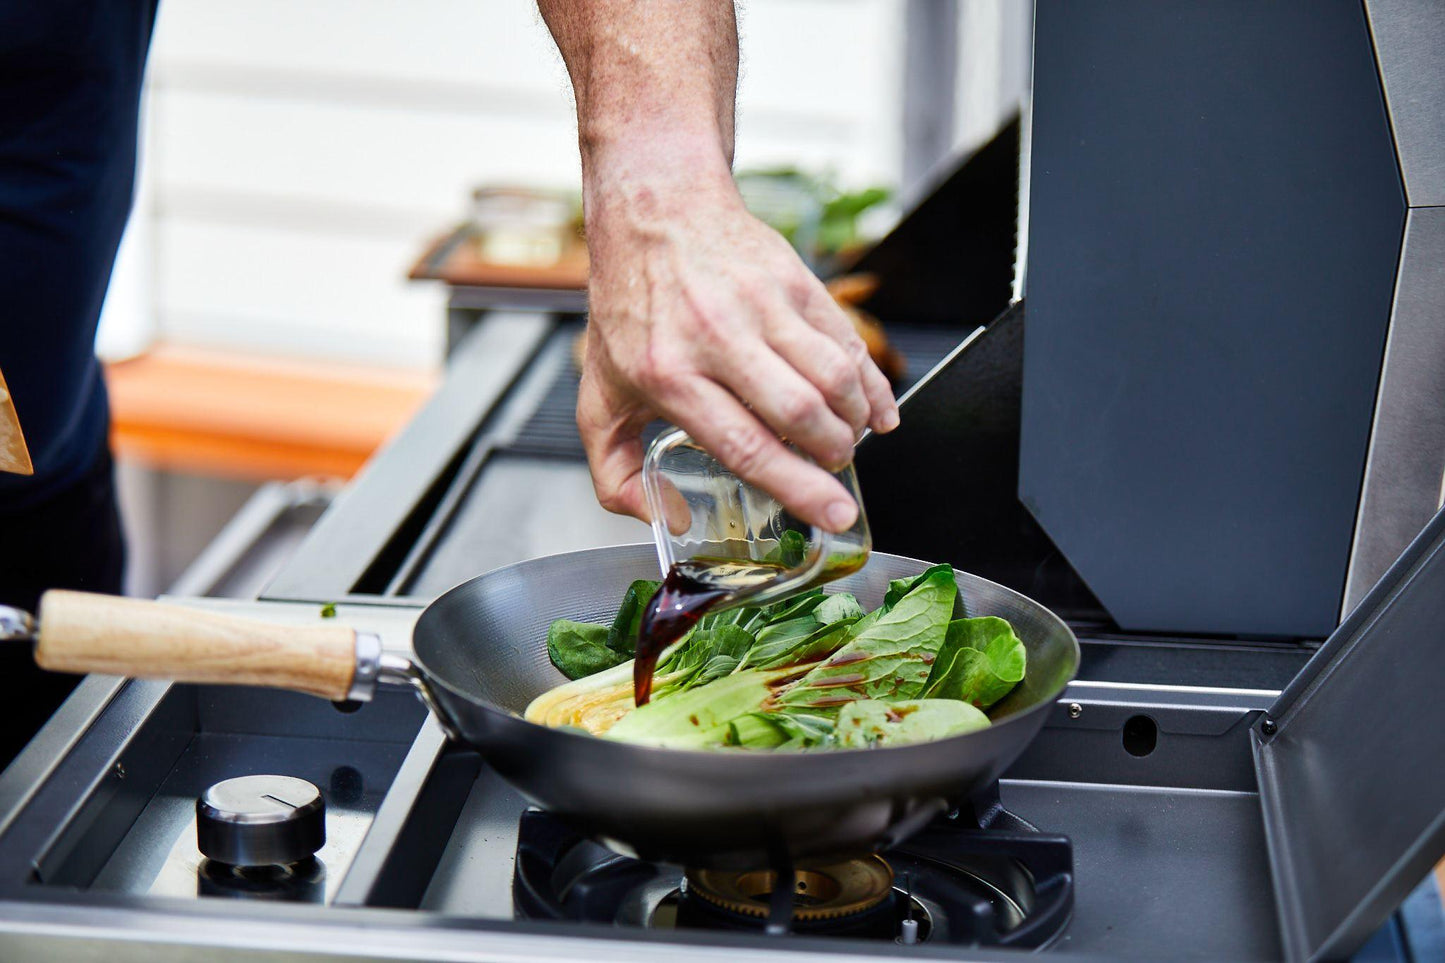 A person pours an ingredient from a small glass jar into a frying pan on a stovetop. The frying pan contains green leafy vegetables and other ingredients, enhancing the outdoor cooking experience with a modern, sleek design reminiscent of the Brisks BeefEater 1500 Series 3 Burner BBQ & Trolley.